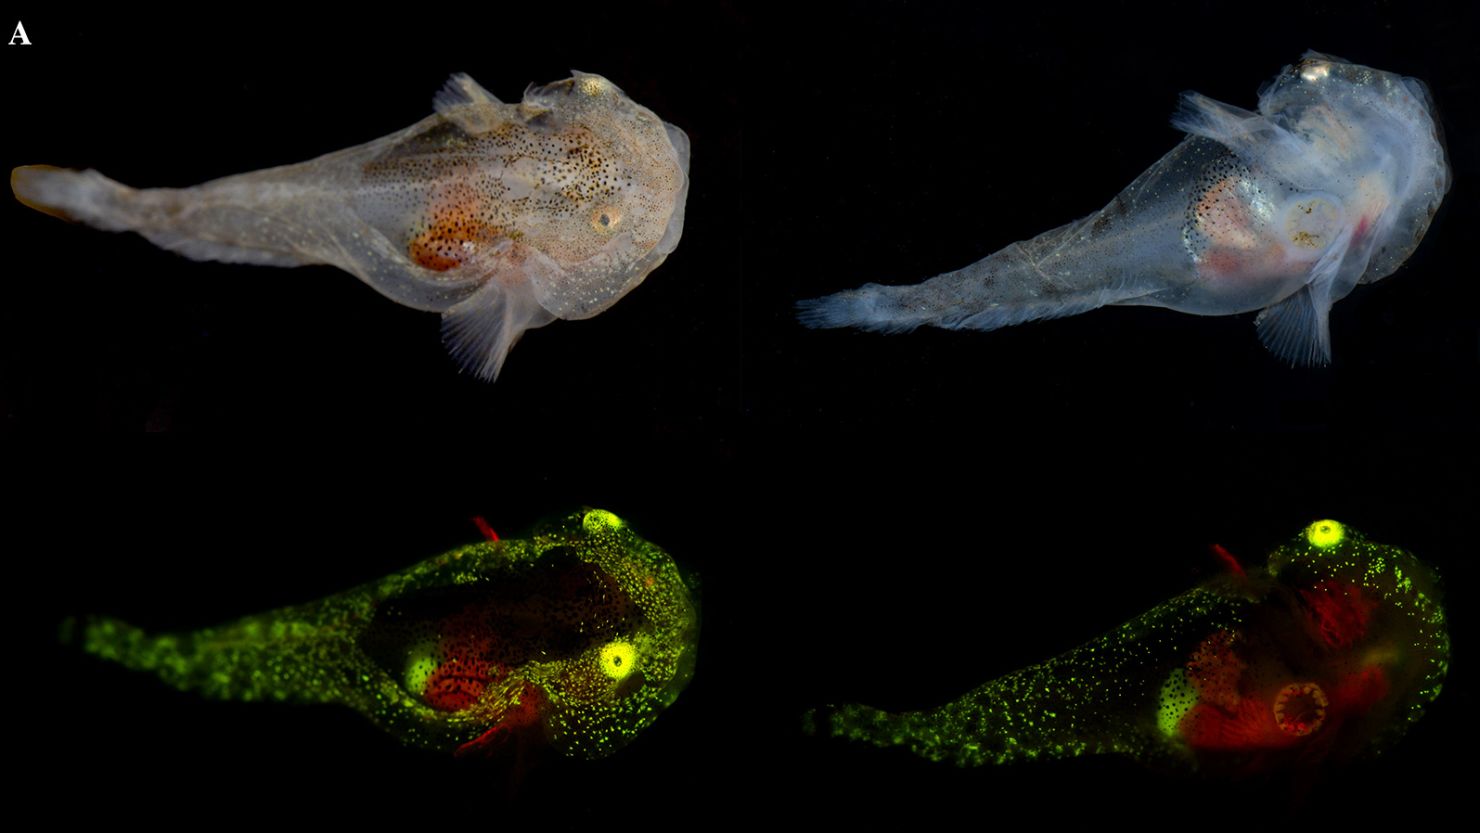 The tiny snailfish is full of antifreeze proteins and also glows in green and red.